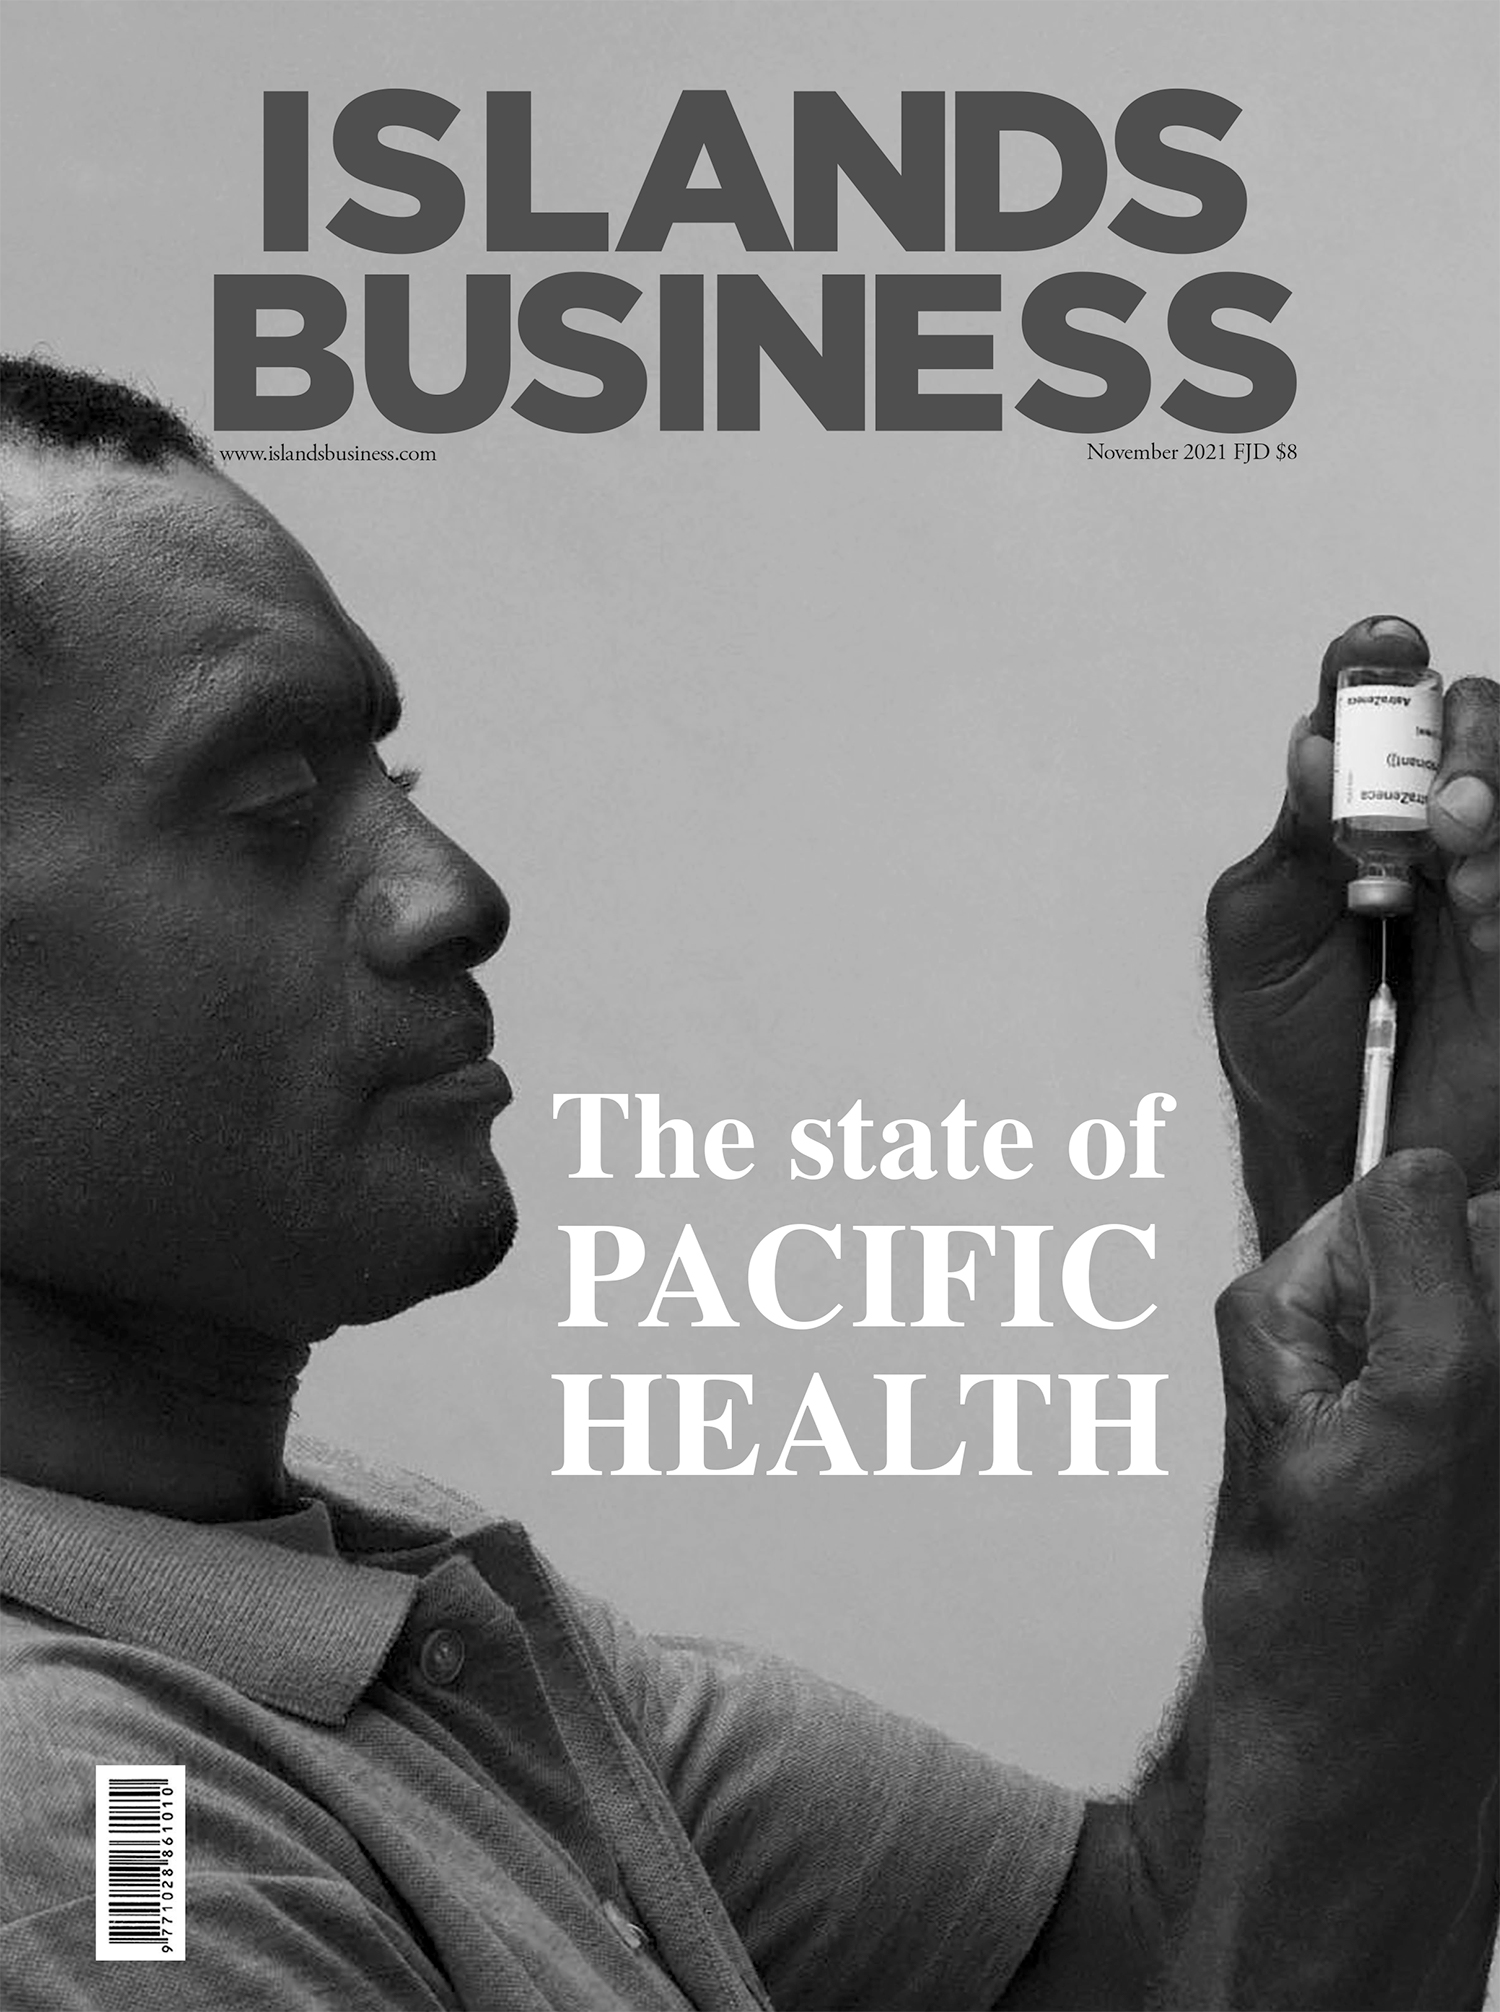 Islands Business Feature- The State of Pacific Health